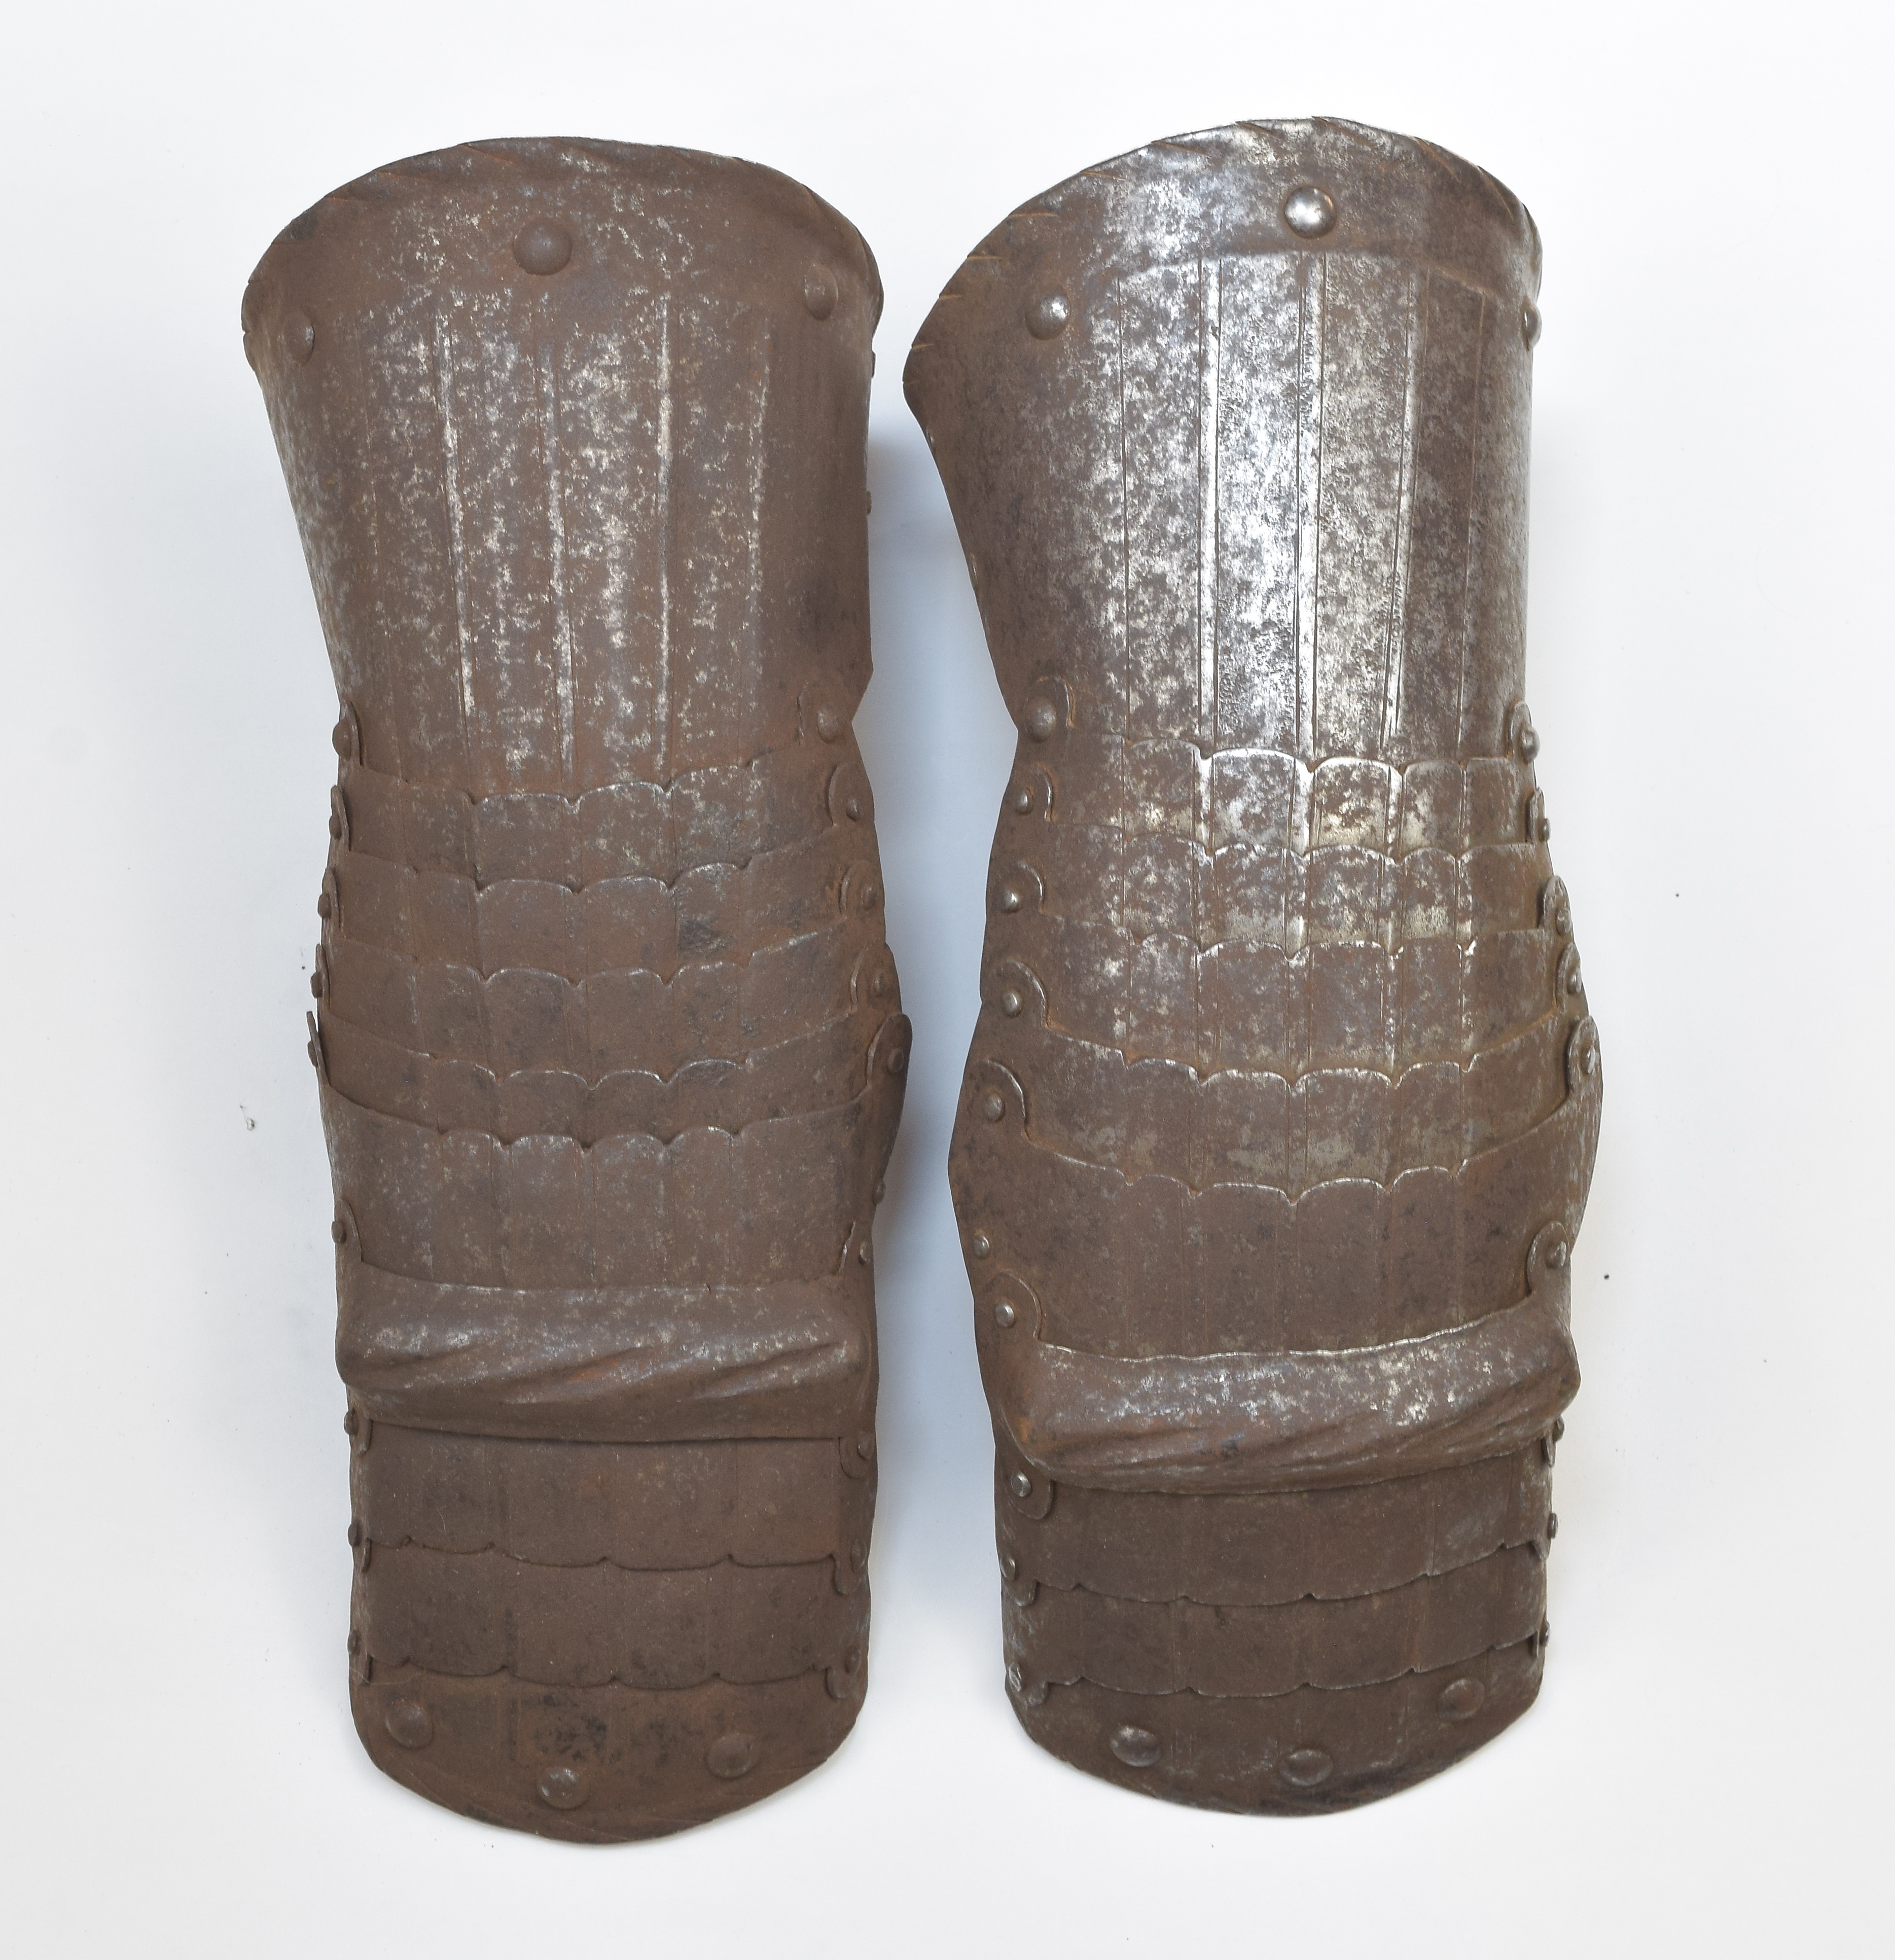 Pair of gauntlets - A-353-a-pair